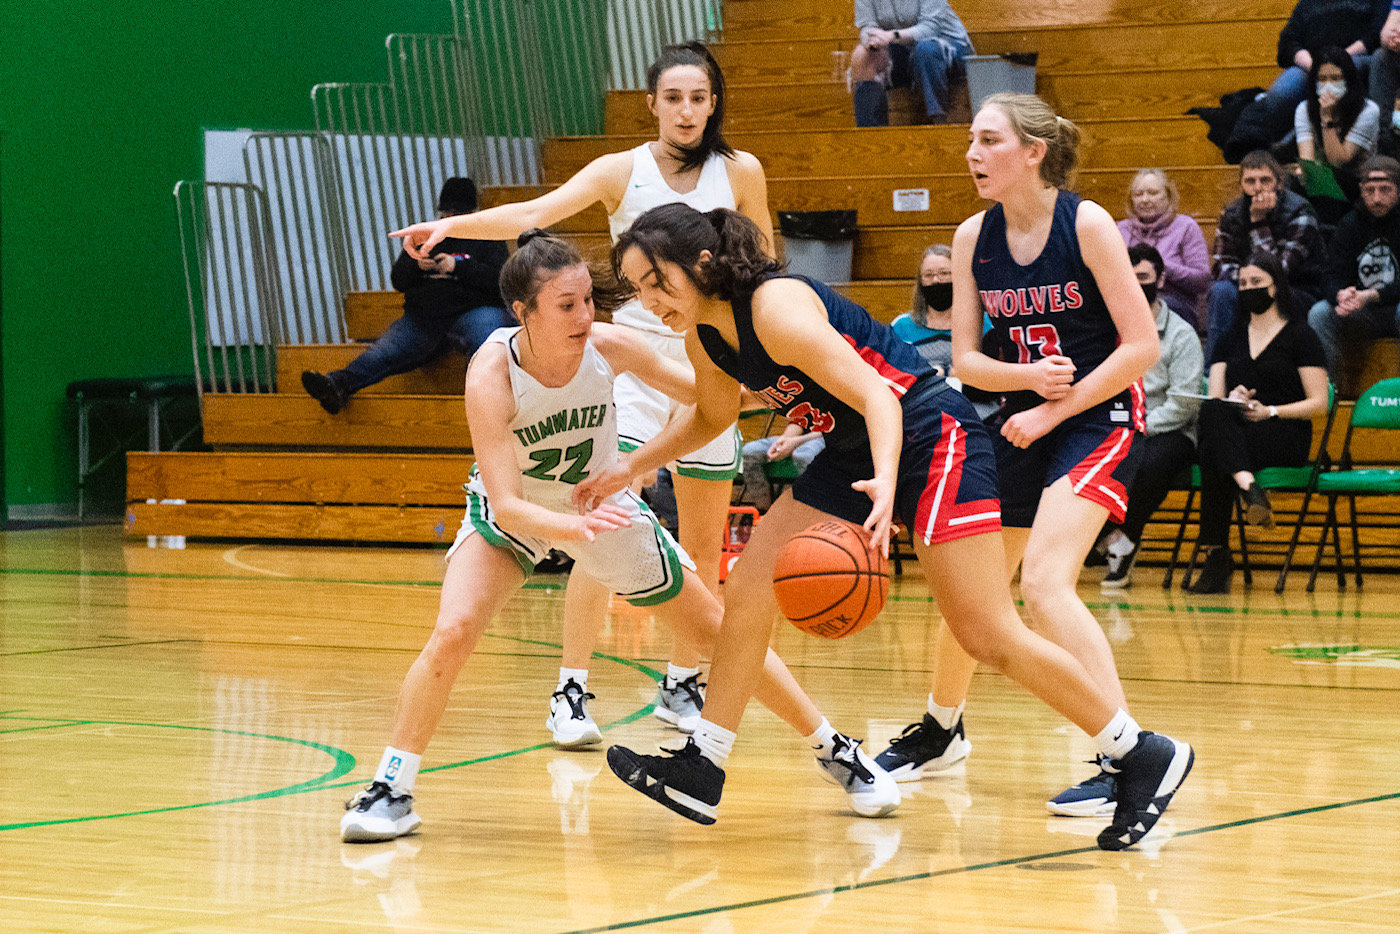 Tumwater's Regan Brewer (22) defends against a Black Hills player on Thursday.